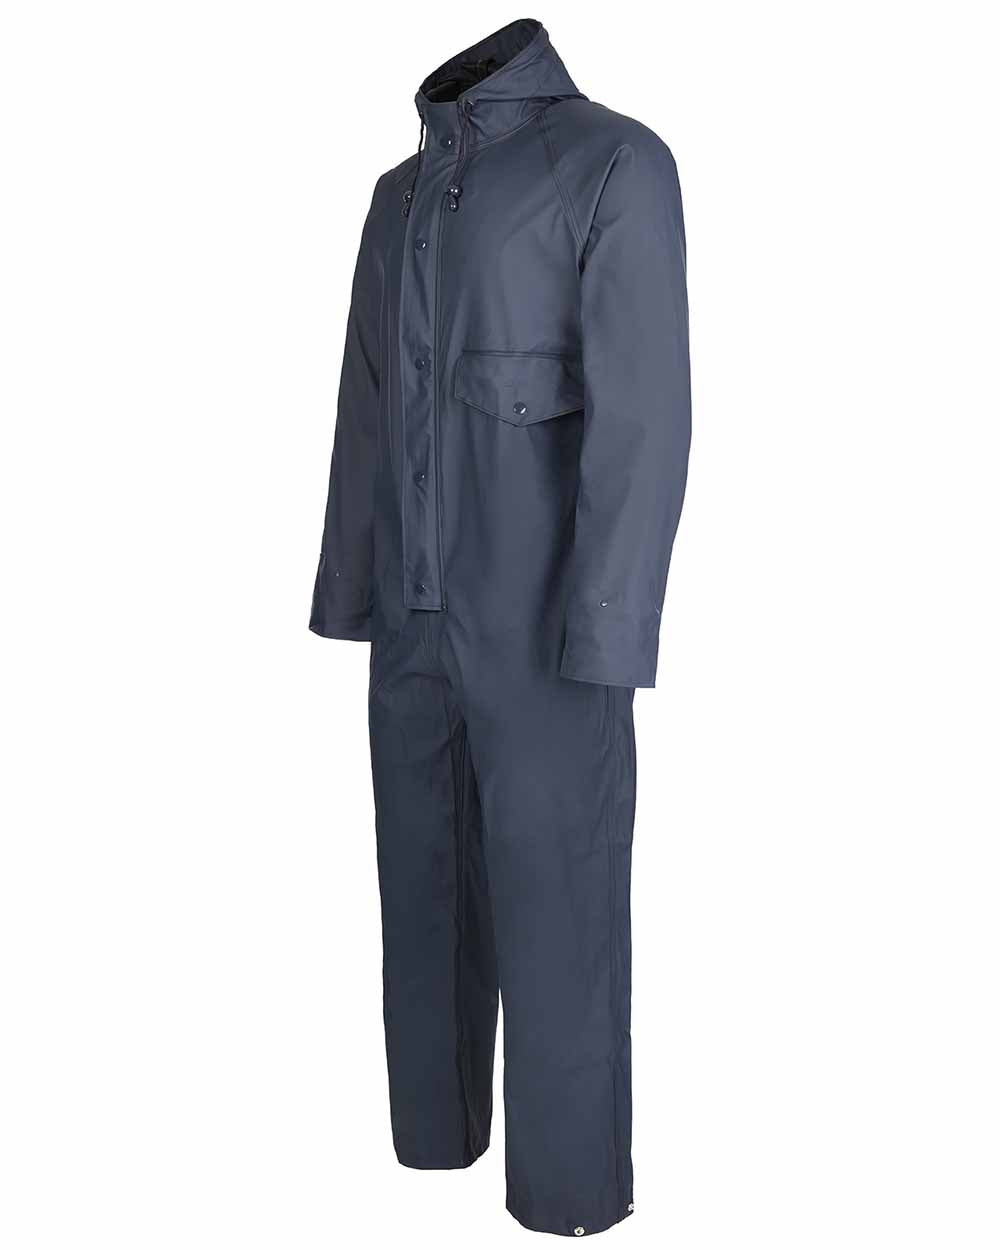 Large pocket Fort Fortex Flex Waterproof Coverall 